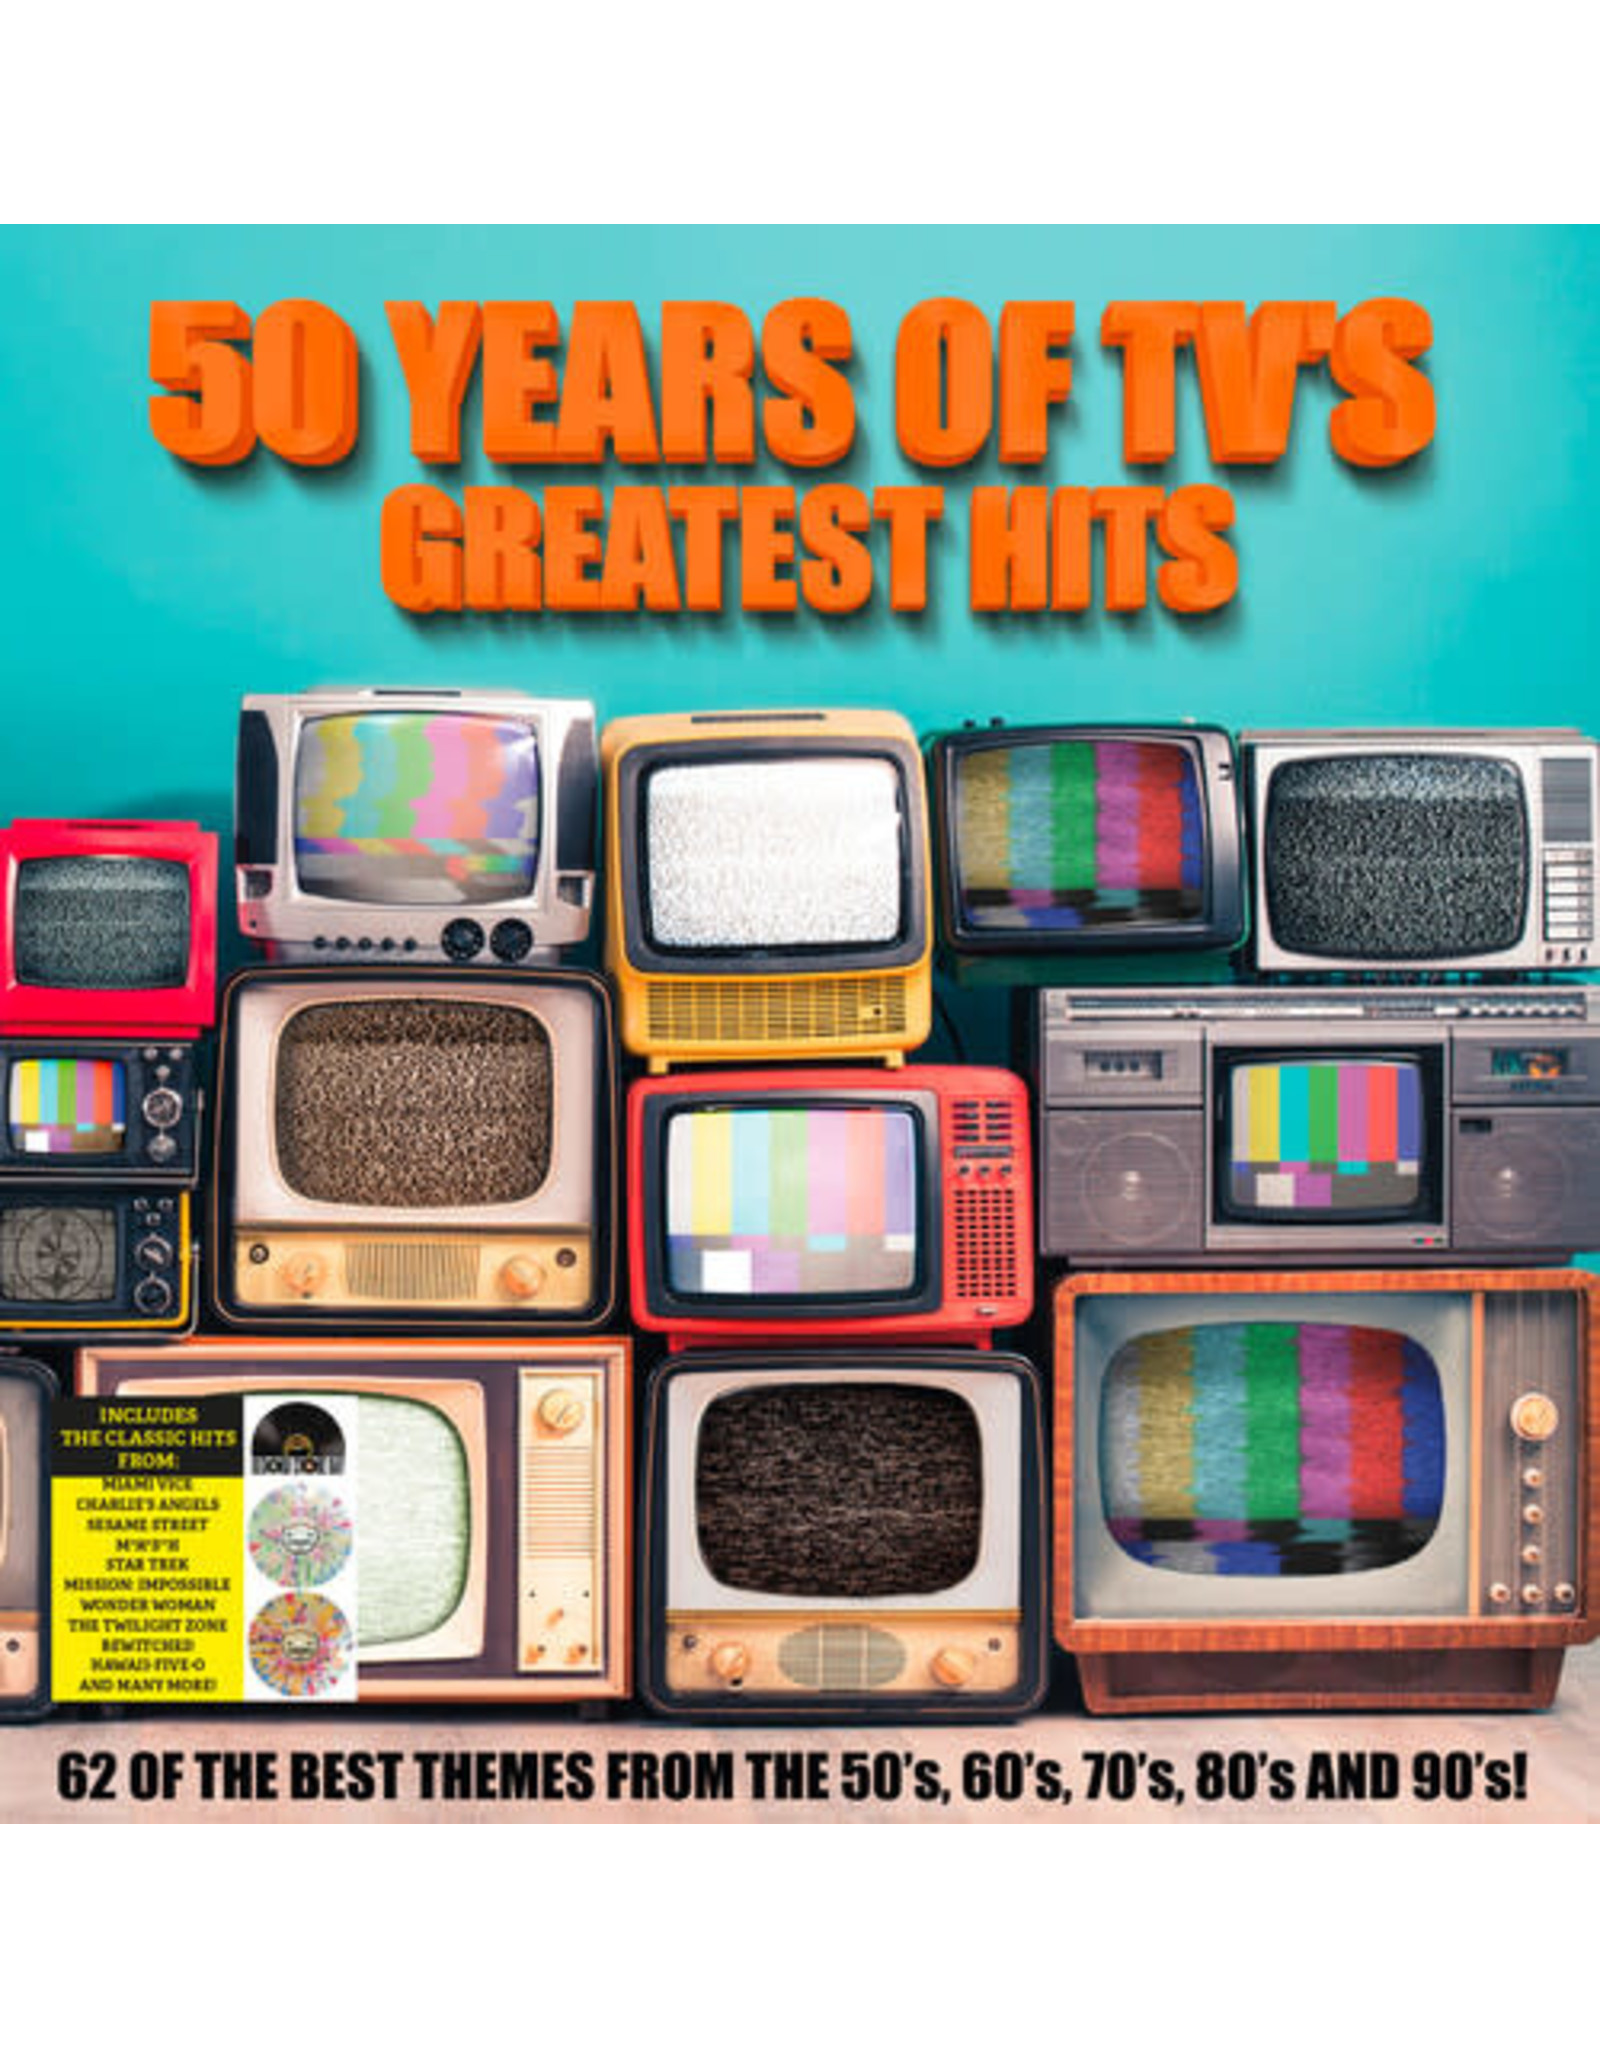 New Vinyl Various - 50 Years of TV's Greatest Hits (RSD Exclusive, Yellow, Red, Green, Blue) 2LP